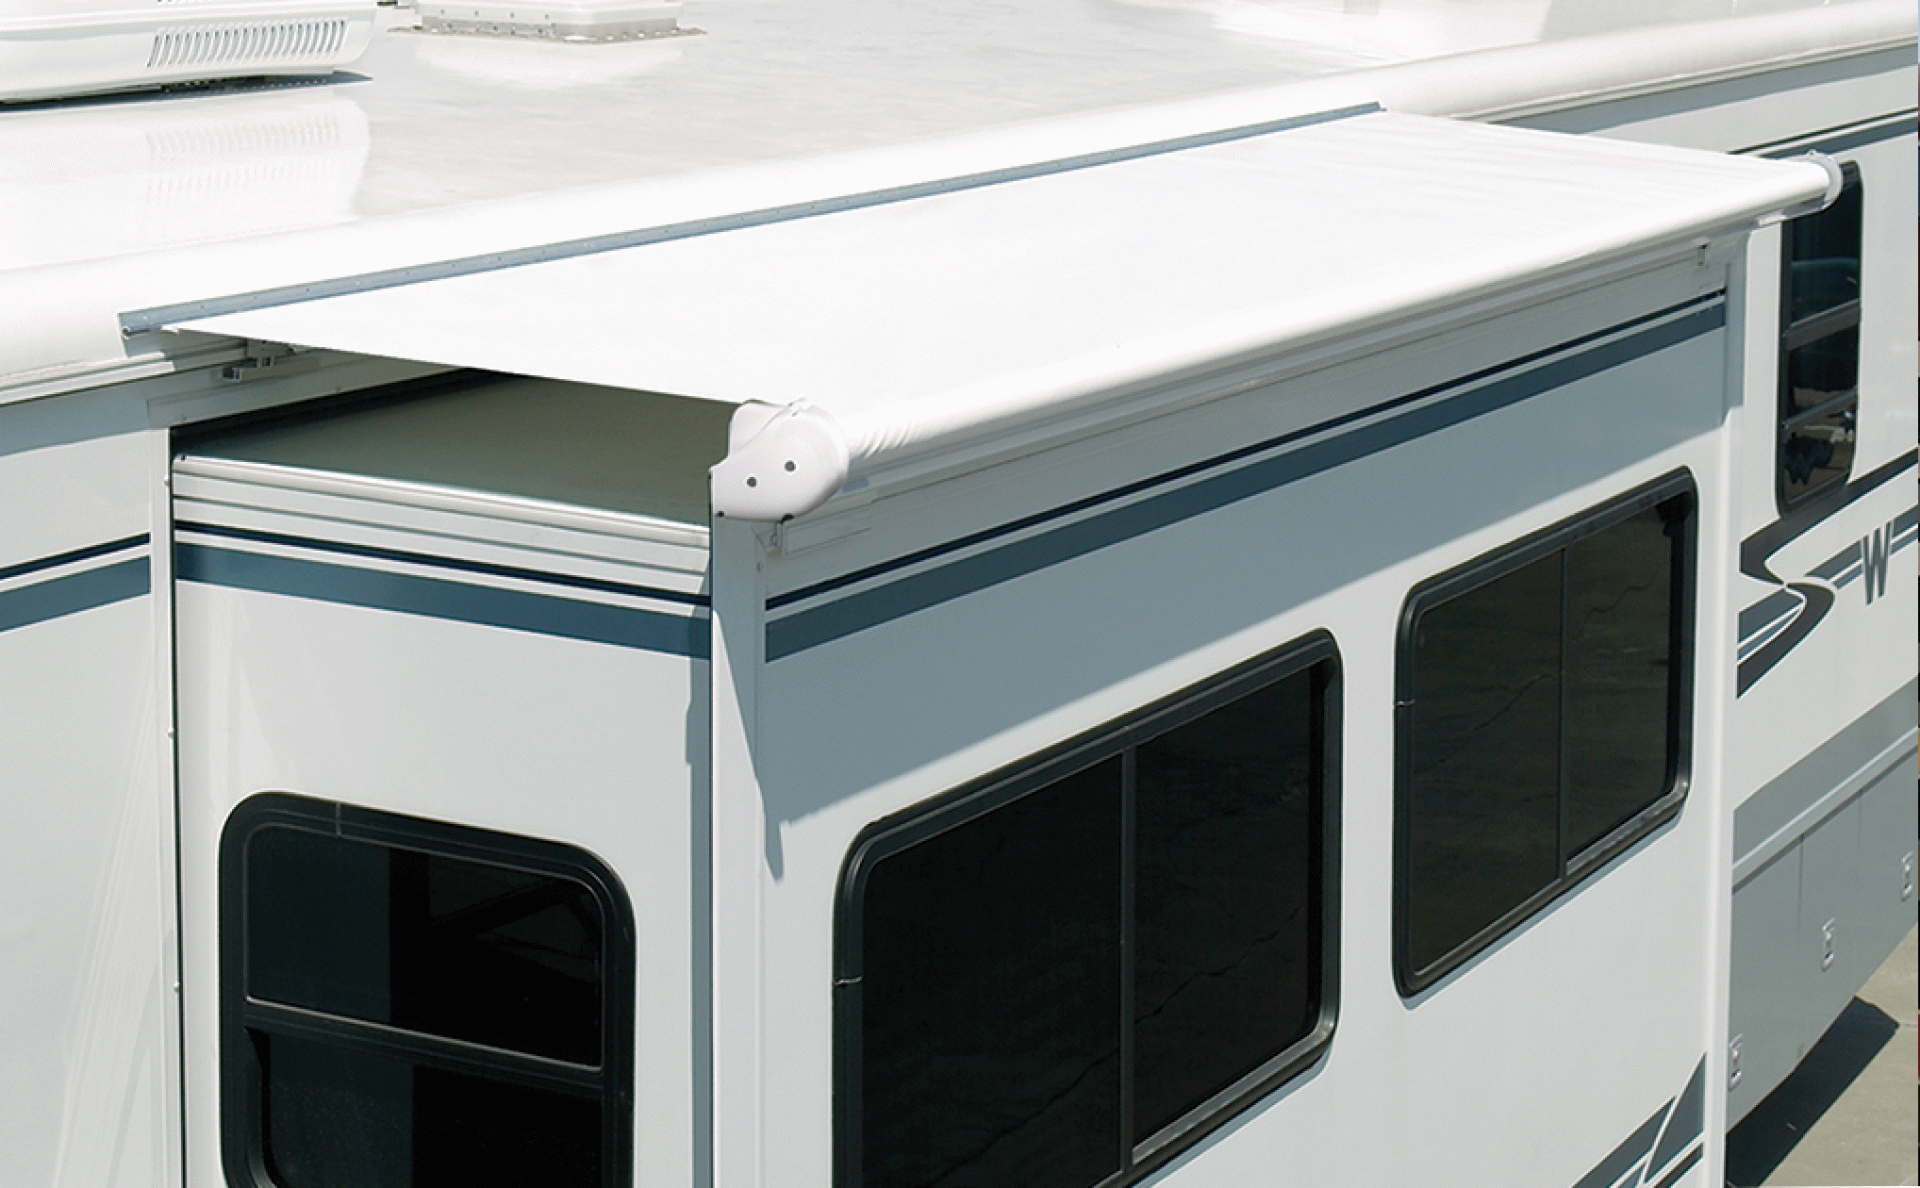 CAREFREE OF COLORADO | UQ0810025 | SIDEOUT KOVER III AWNING 78' - 81" ROOF RANGE WHITE VINYL FABRIC & DEFLECTOR